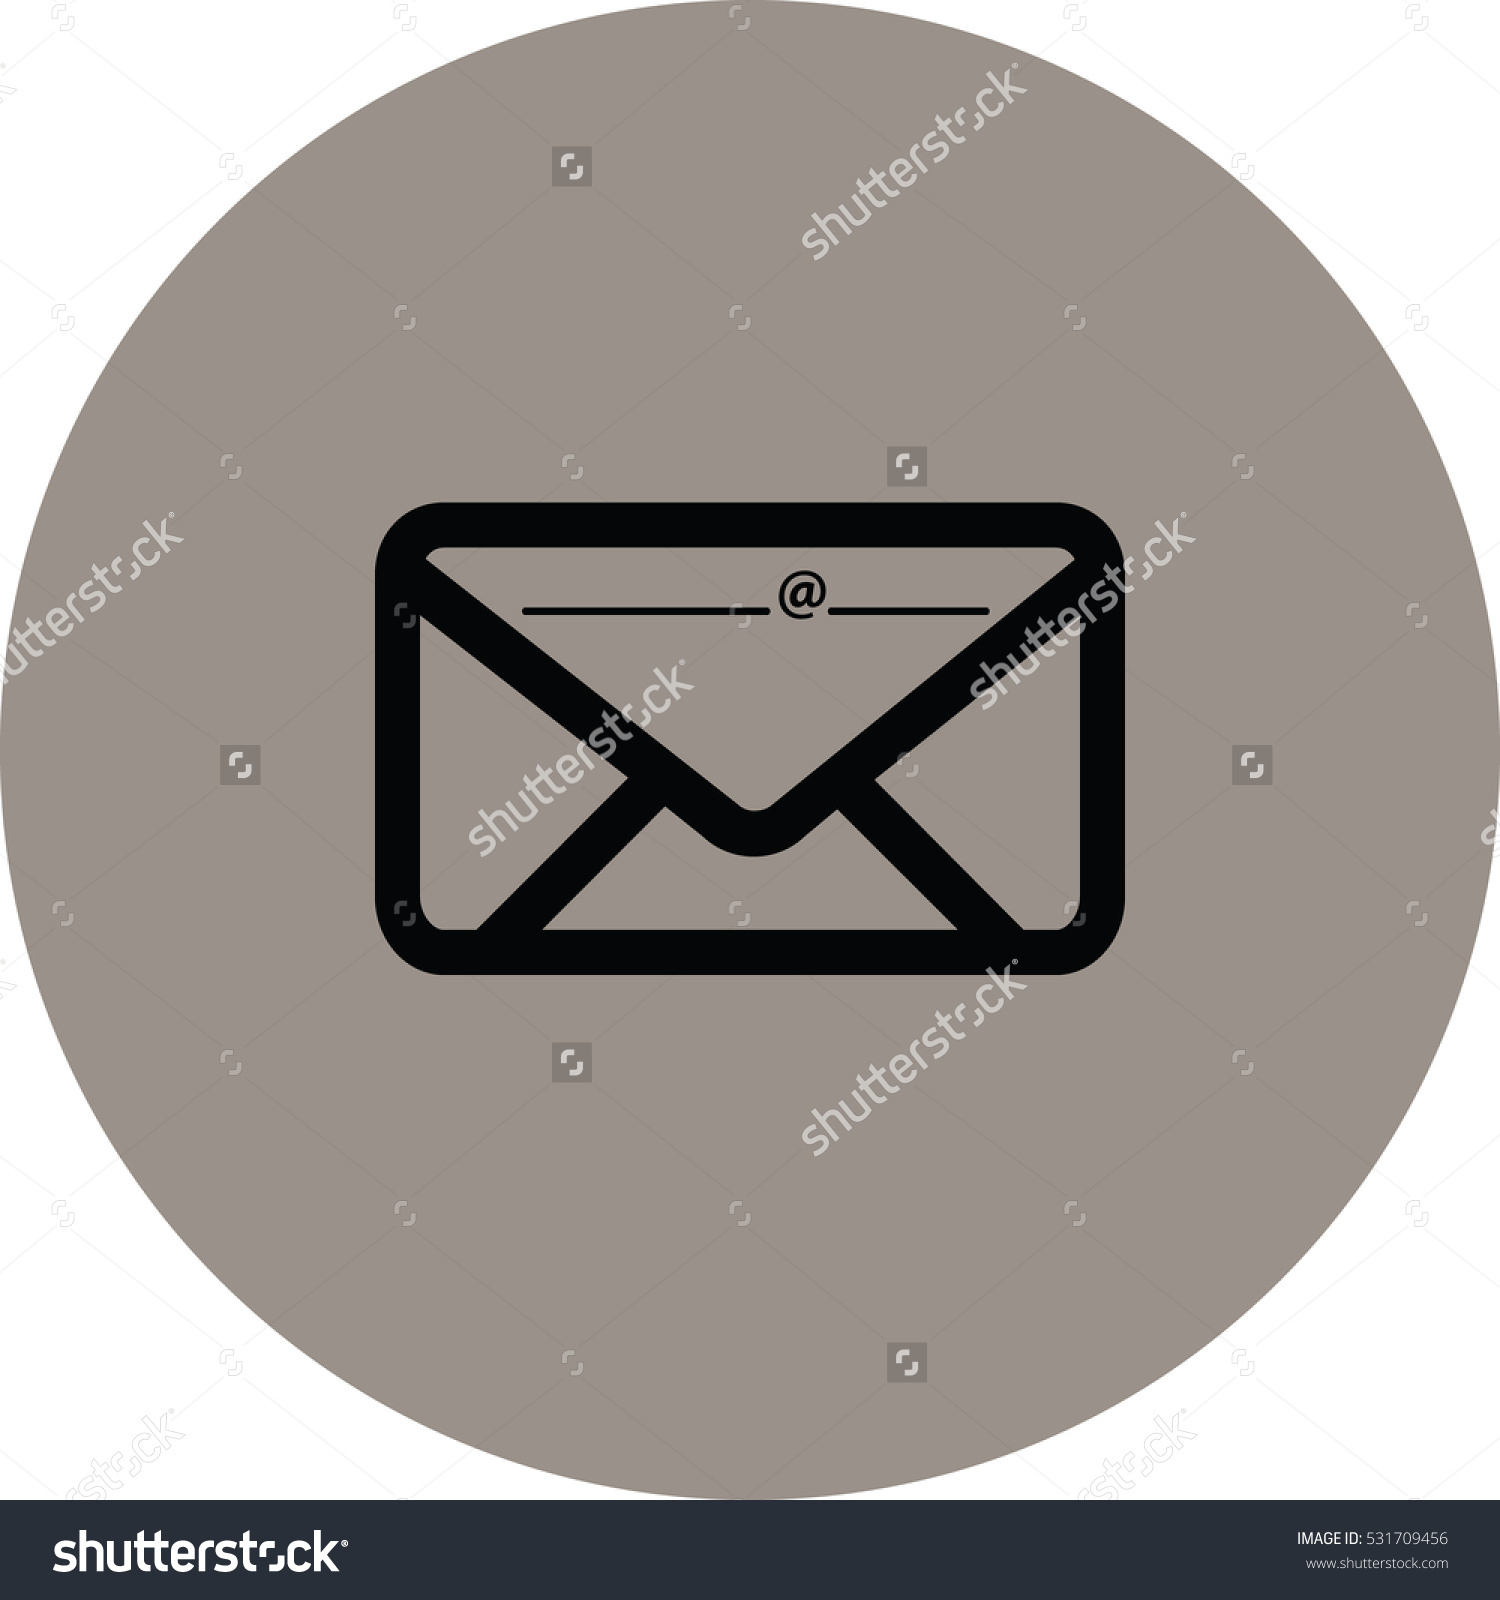 Edit Vectors Free Online - Email icon | Shutterstock Editor